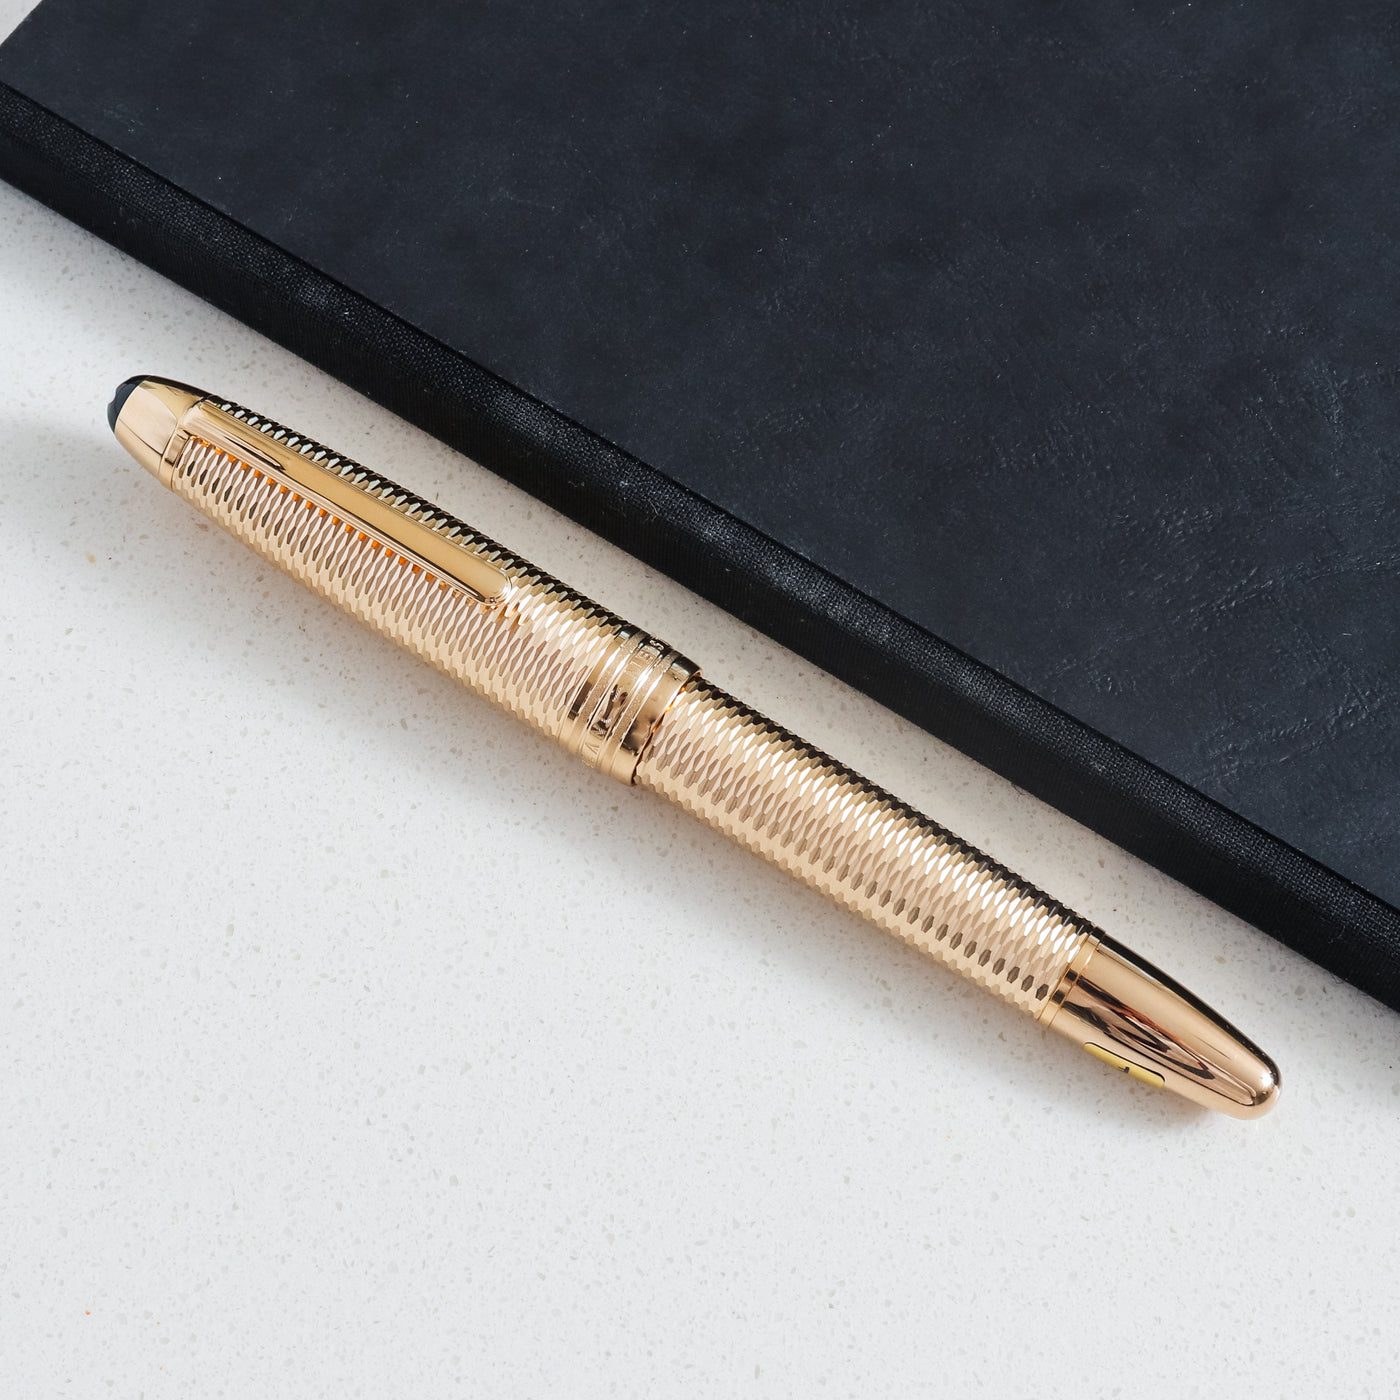 Montblanc Meisterstück 146 Solitaire Geometry Champagne Gold LeGrand Fountain Pen